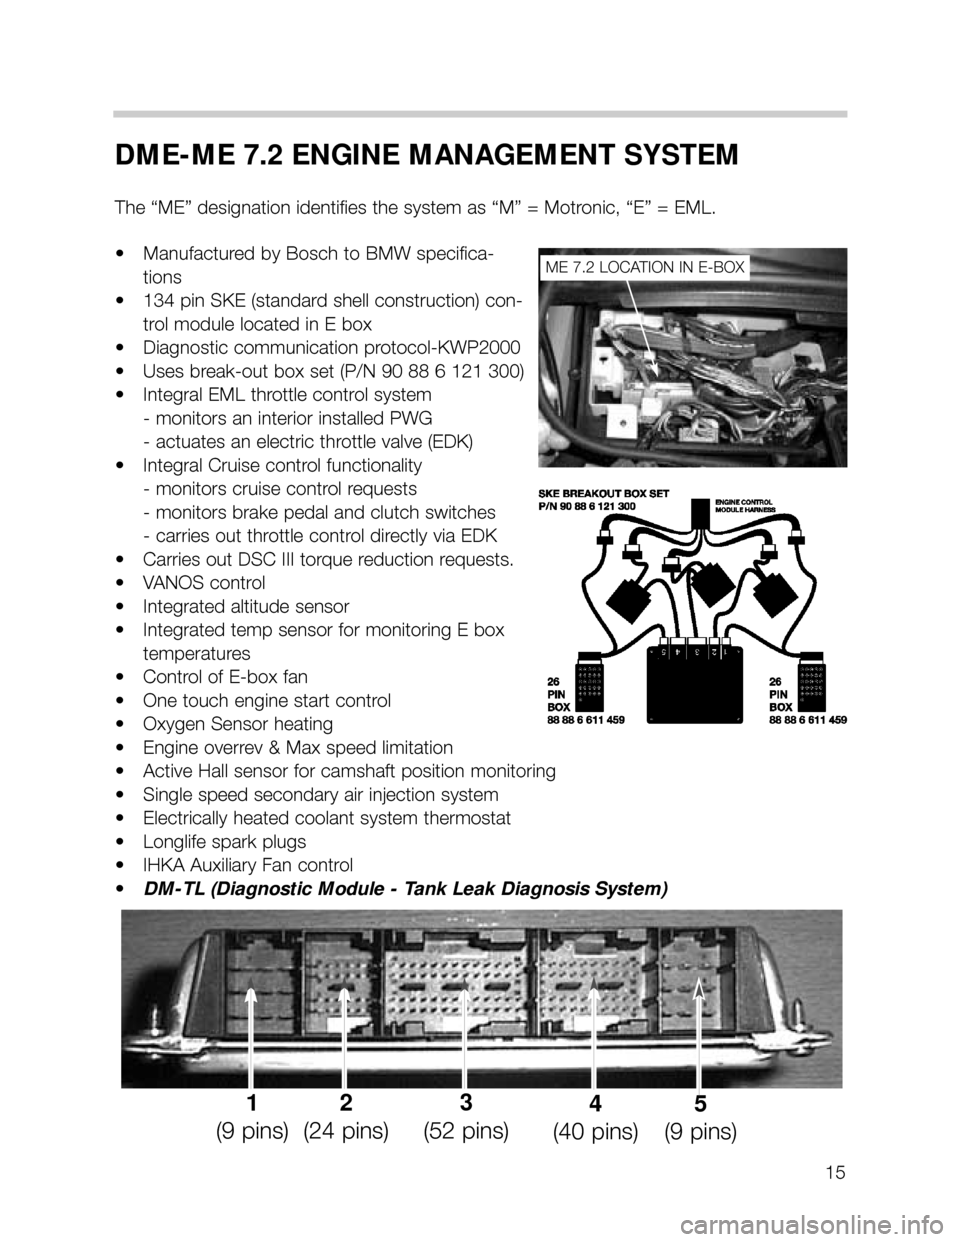 BMW X5 2005 E53 M62TU Engine User Guide 15
DME-ME 7.2 ENGINE MANAGEMENT SYSTEM
The “ME” designation identifies the system as “M” = Motronic, “E” = EML.
• Manufactured by Bosch to BMW specifica-
tions
• 134 pin SKE (standard 